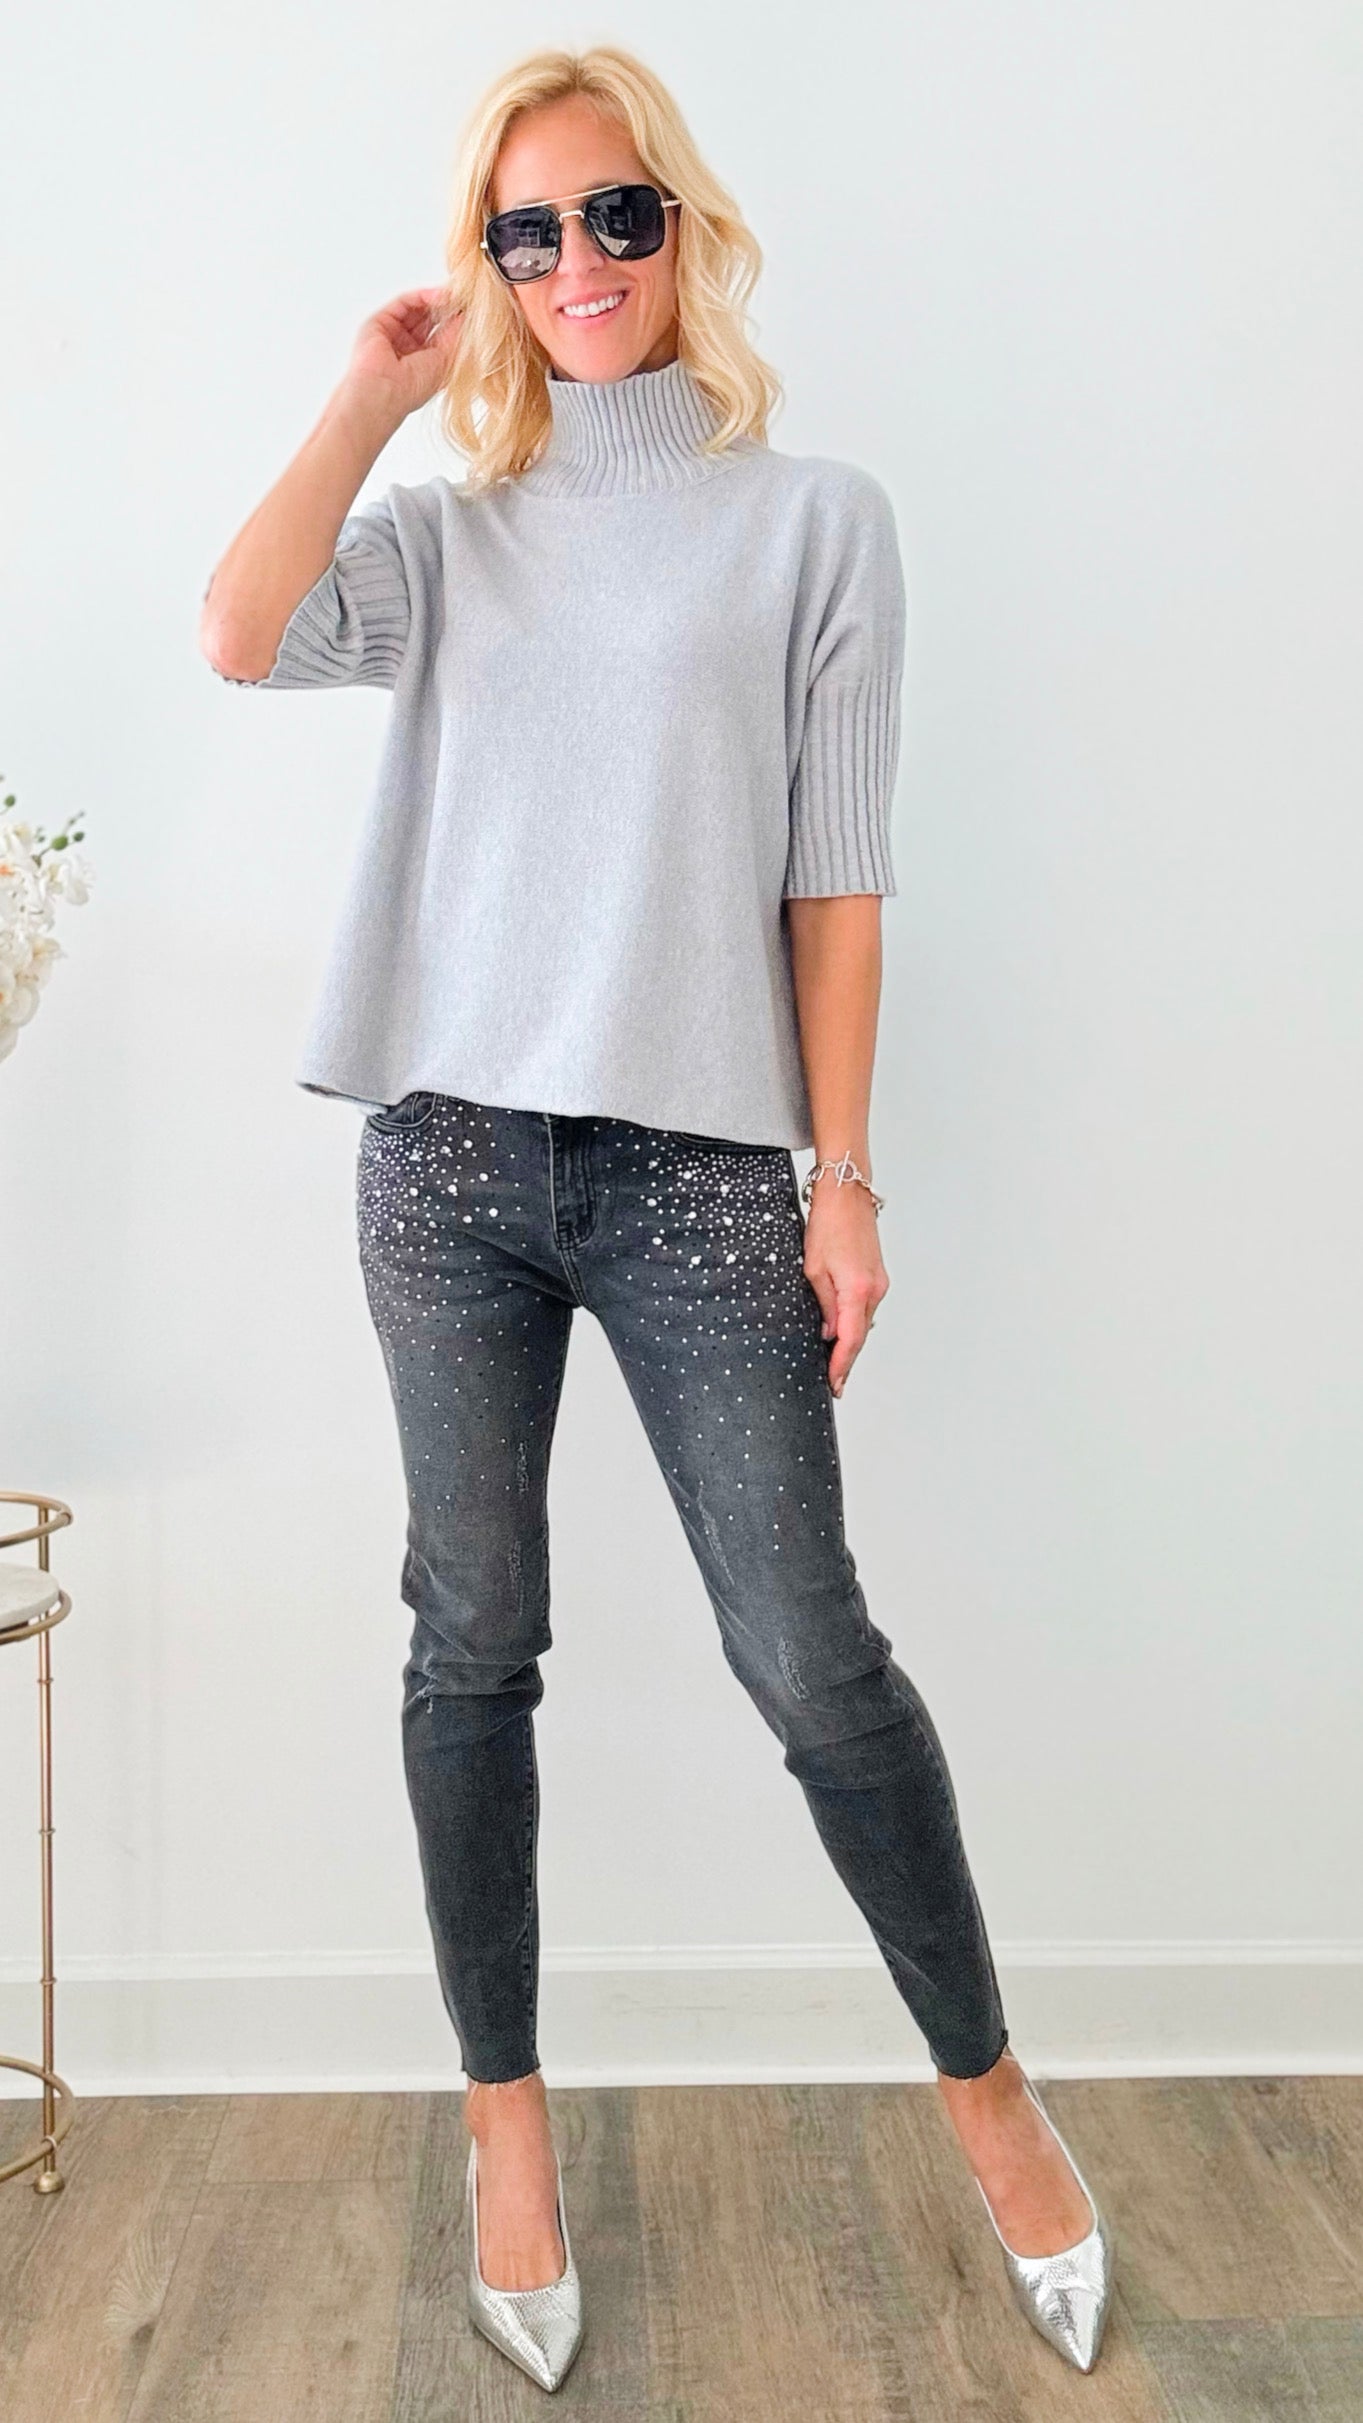 Rhinestone Skinny Jeans-190 Denim-Vocal-Coastal Bloom Boutique, find the trendiest versions of the popular styles and looks Located in Indialantic, FL